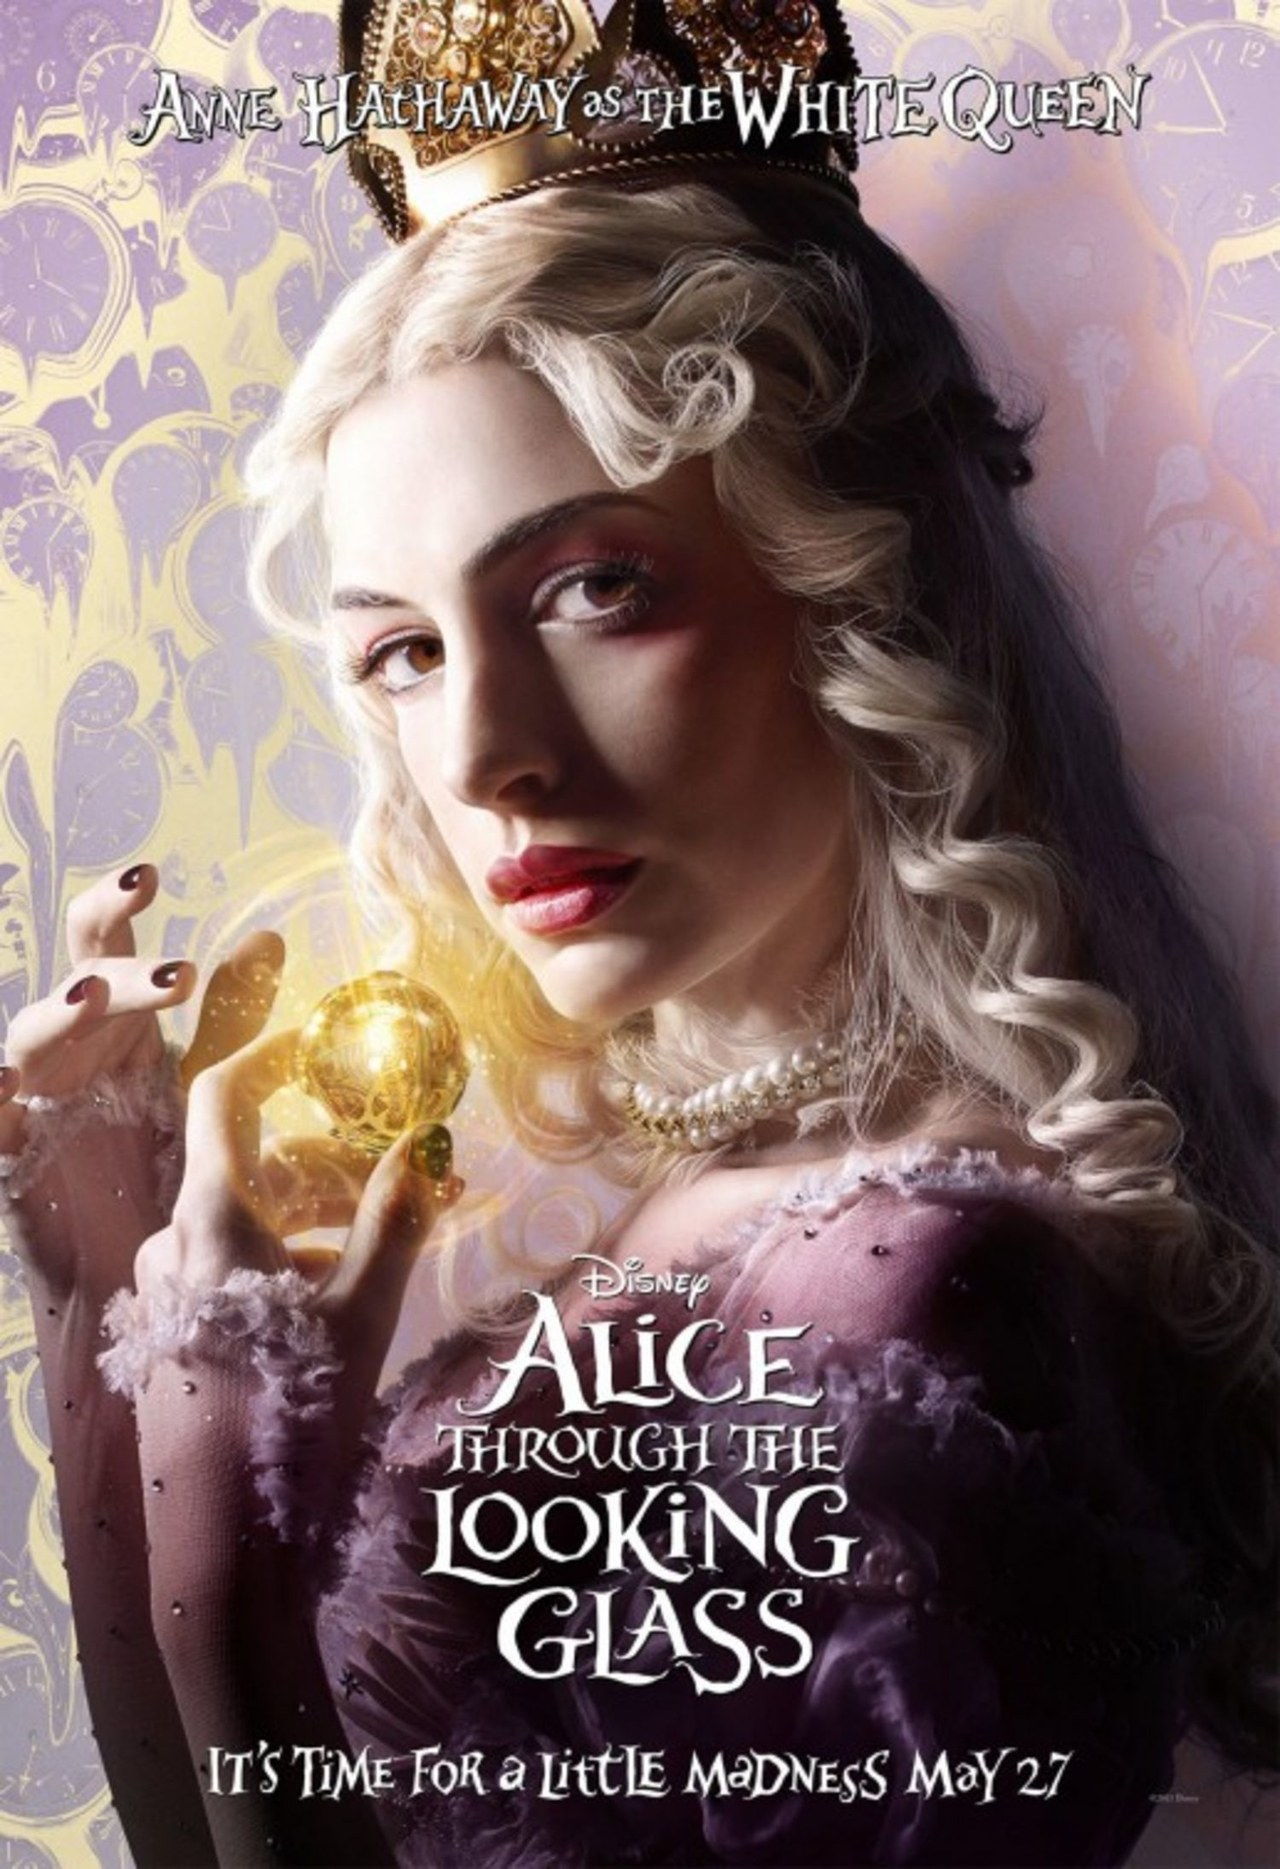 Alice looking glass